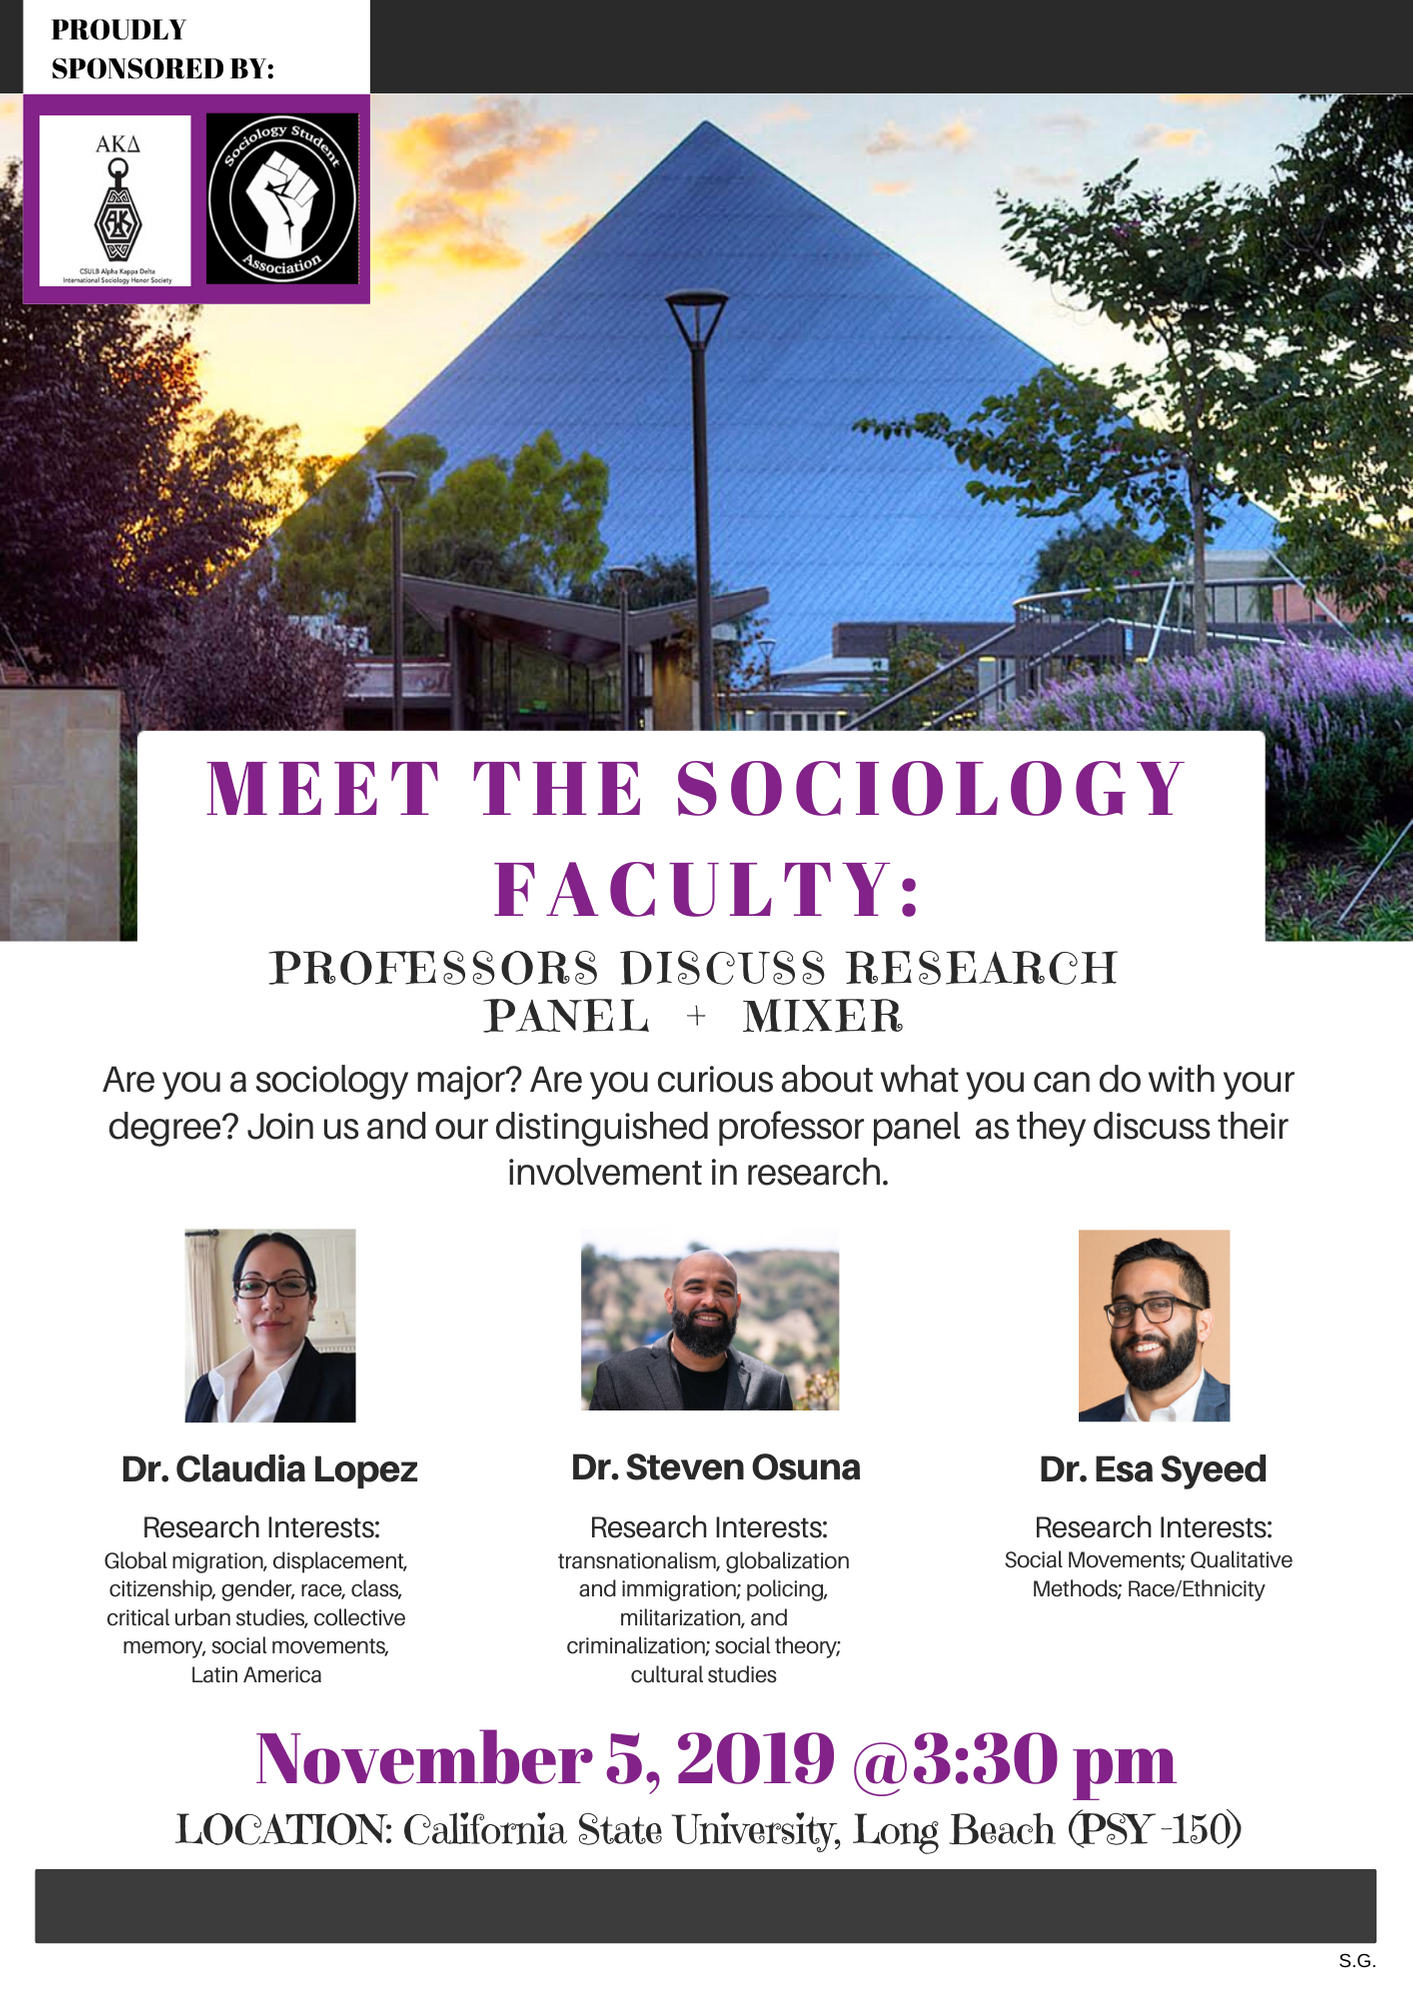 Meet the Sociology Faculty: Mixer and Panel 3:30pm, PSY-150